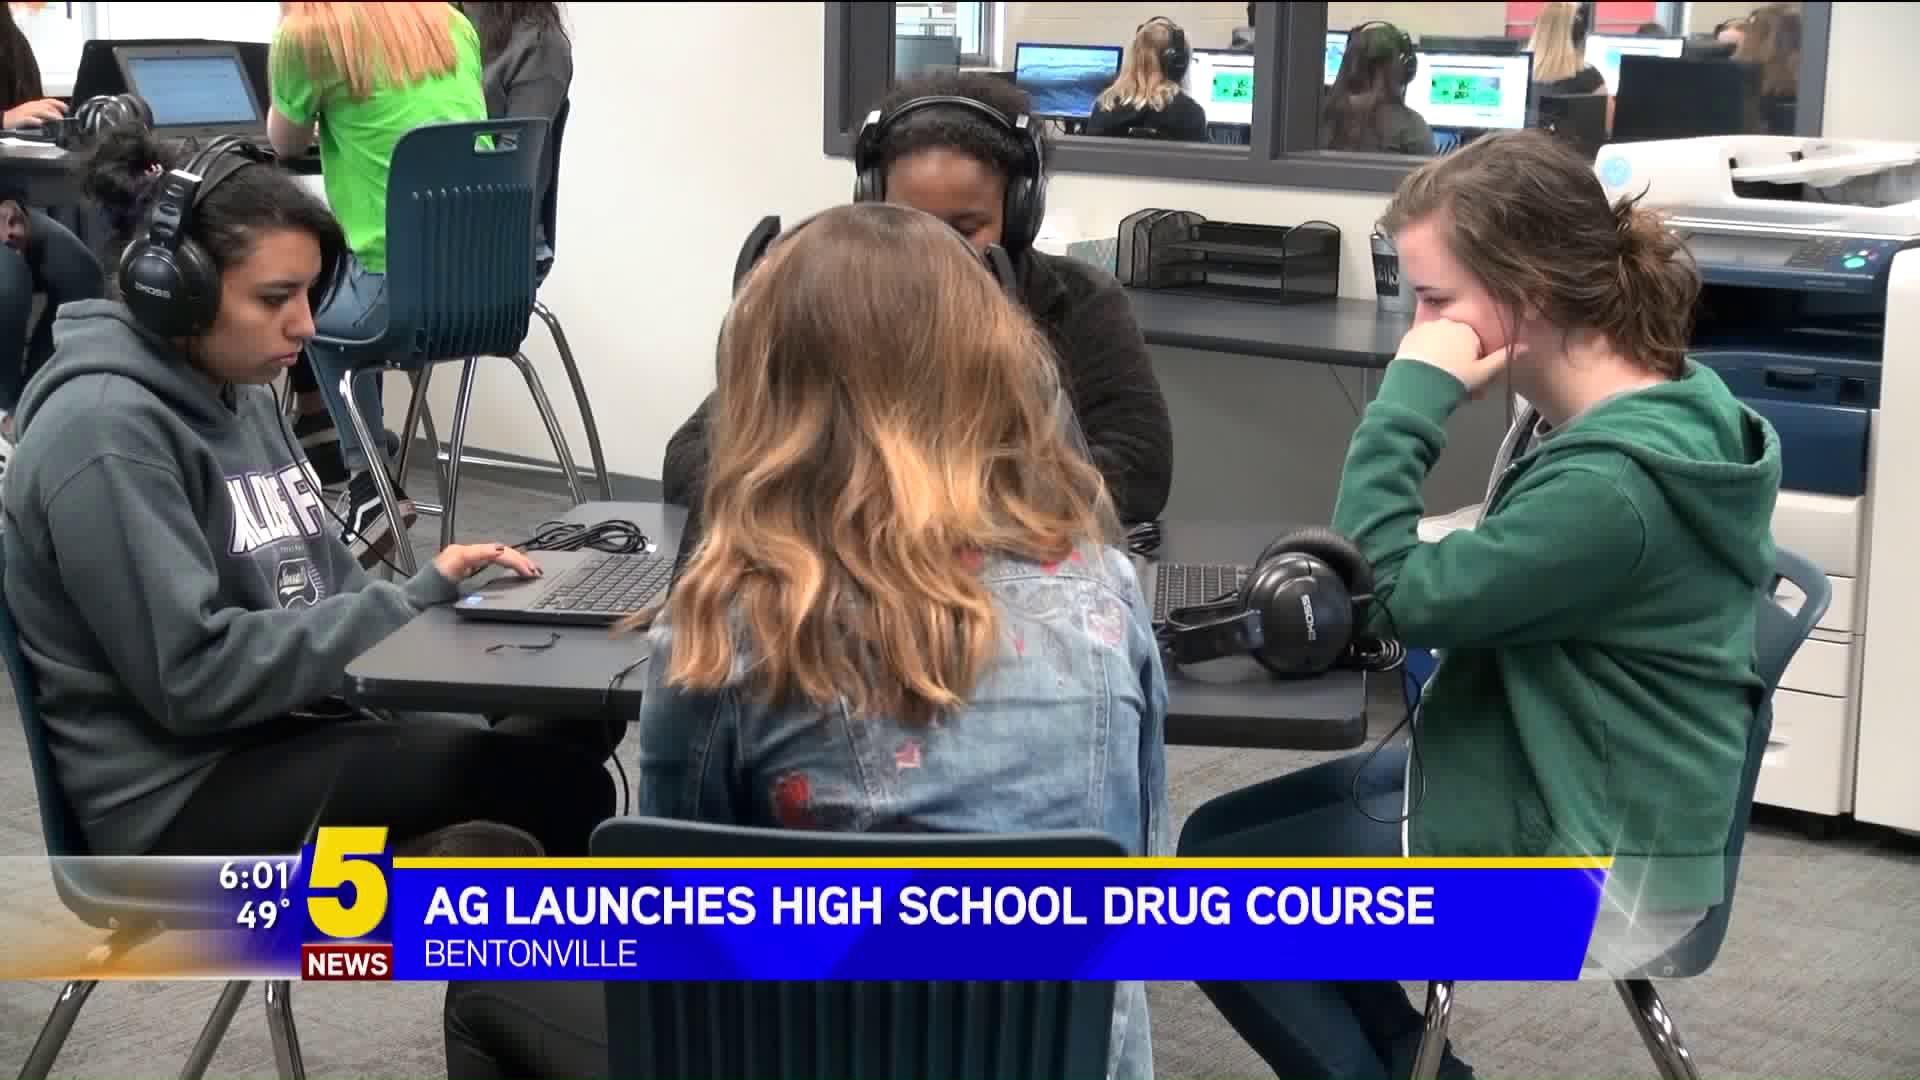 AG Launches High School Drug Course